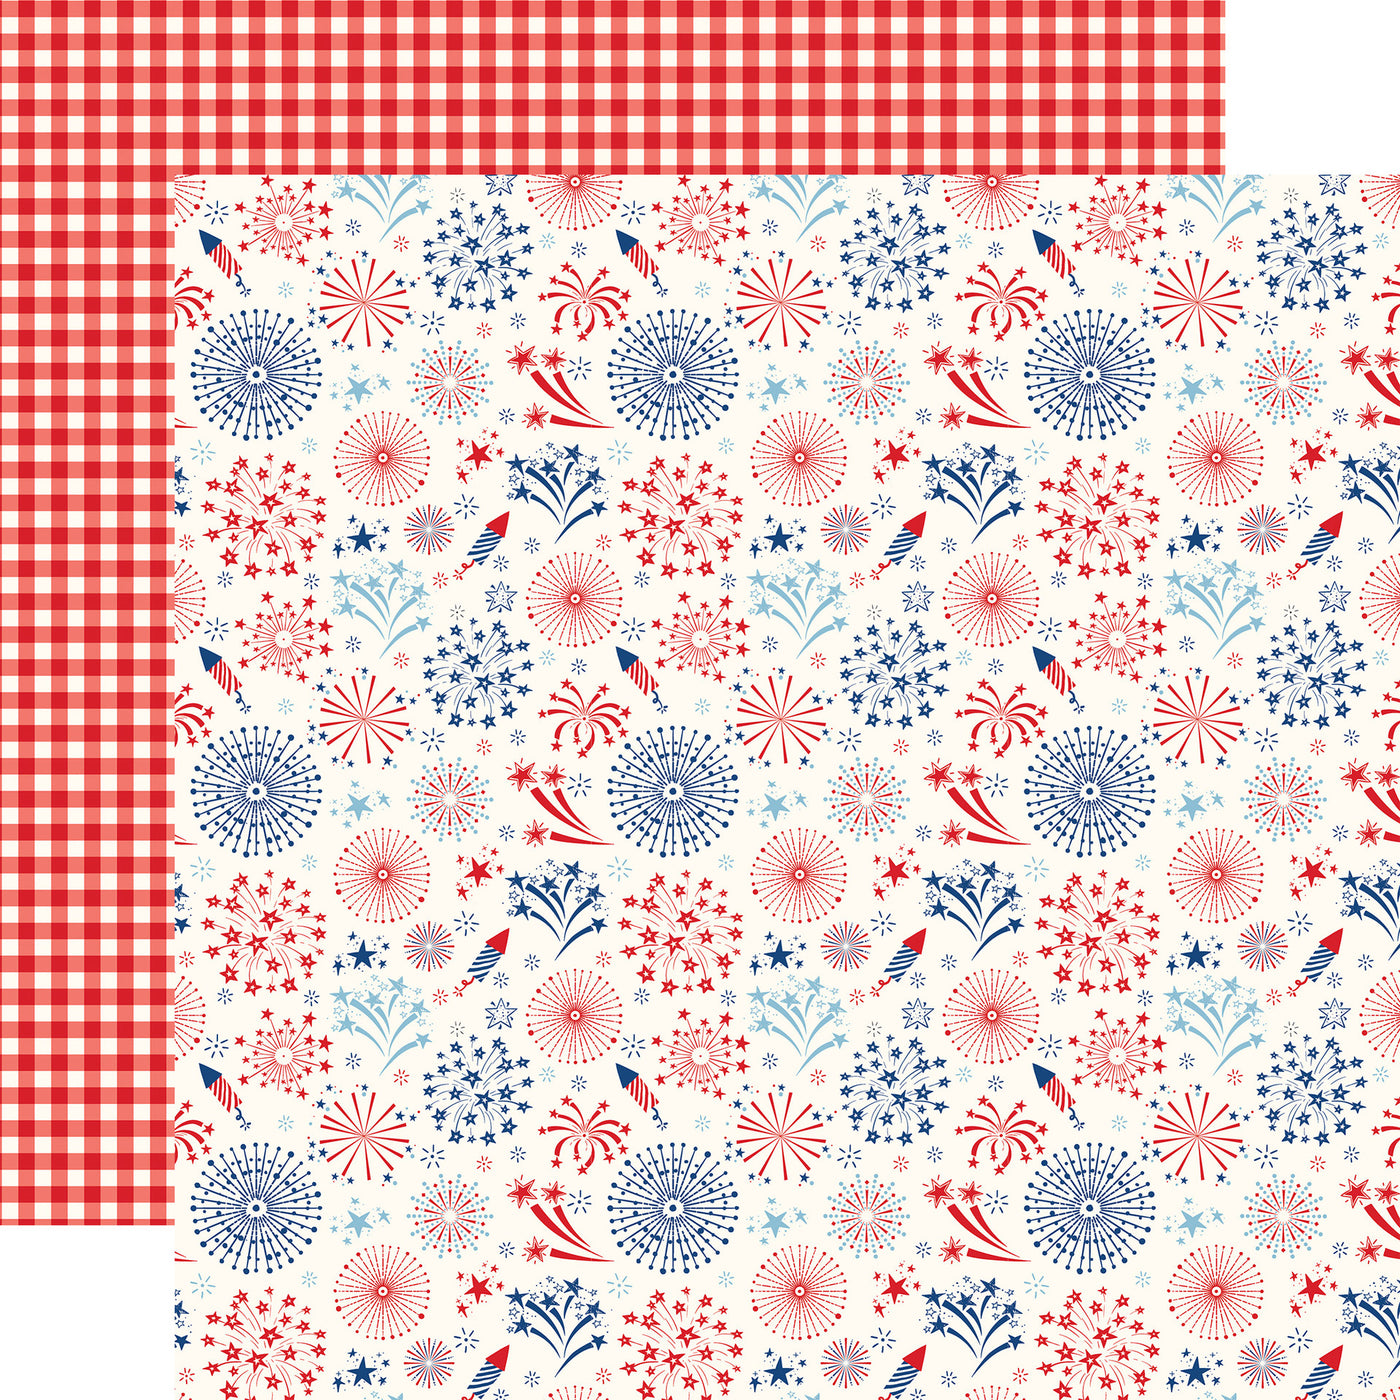 12x12 double-sided patterned paper - (Side A - red, white, and blue fireworks on a white background; Side B - red and white gingham) - Echo Park Paper.